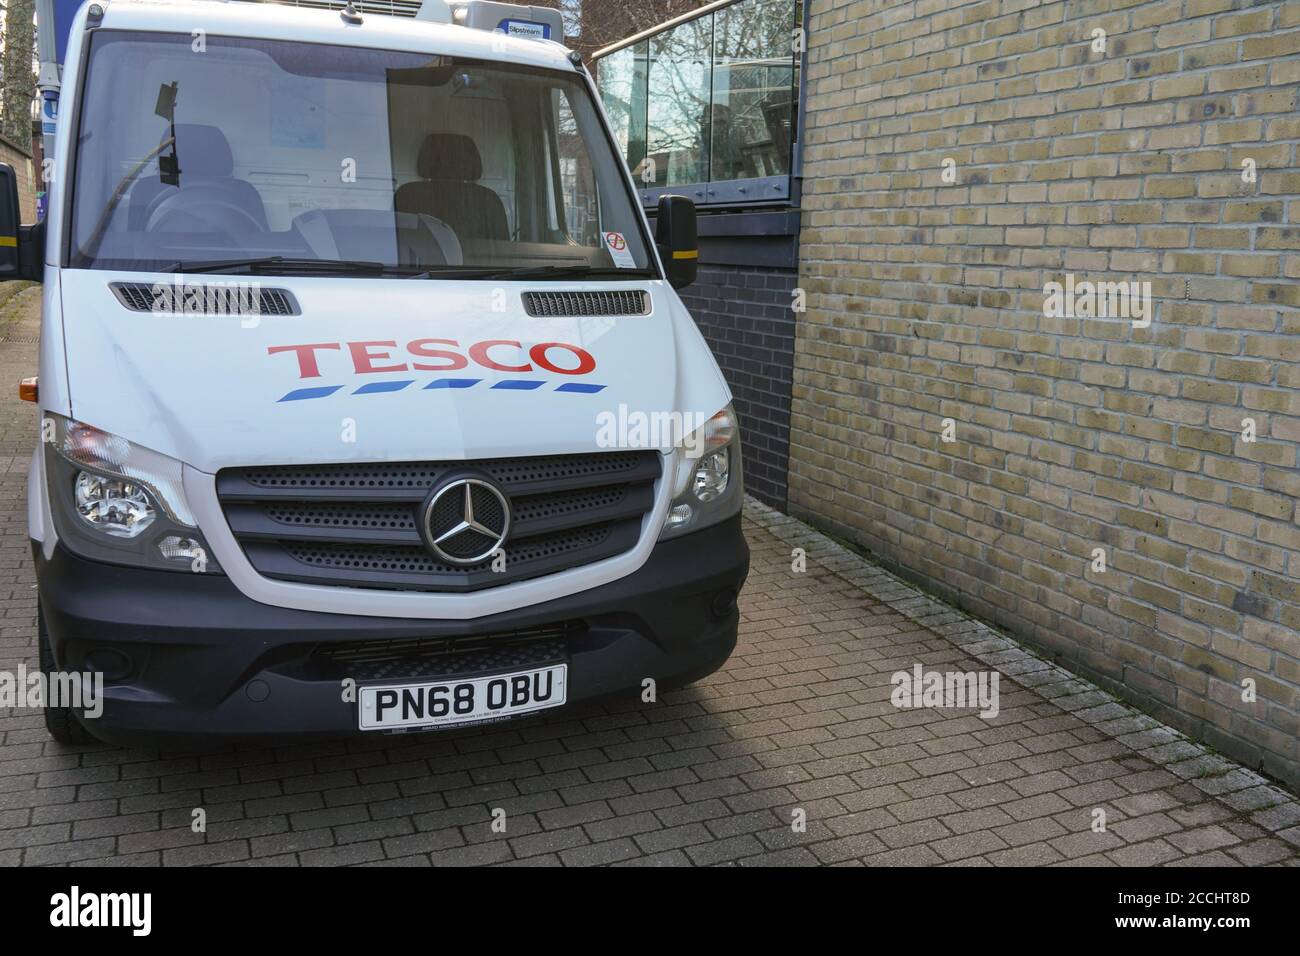 London, United Kingdom - February 03, 2019: White Tesco delivery van parked in small street, British supermarket offers food and groceries deliveries Stock Photo